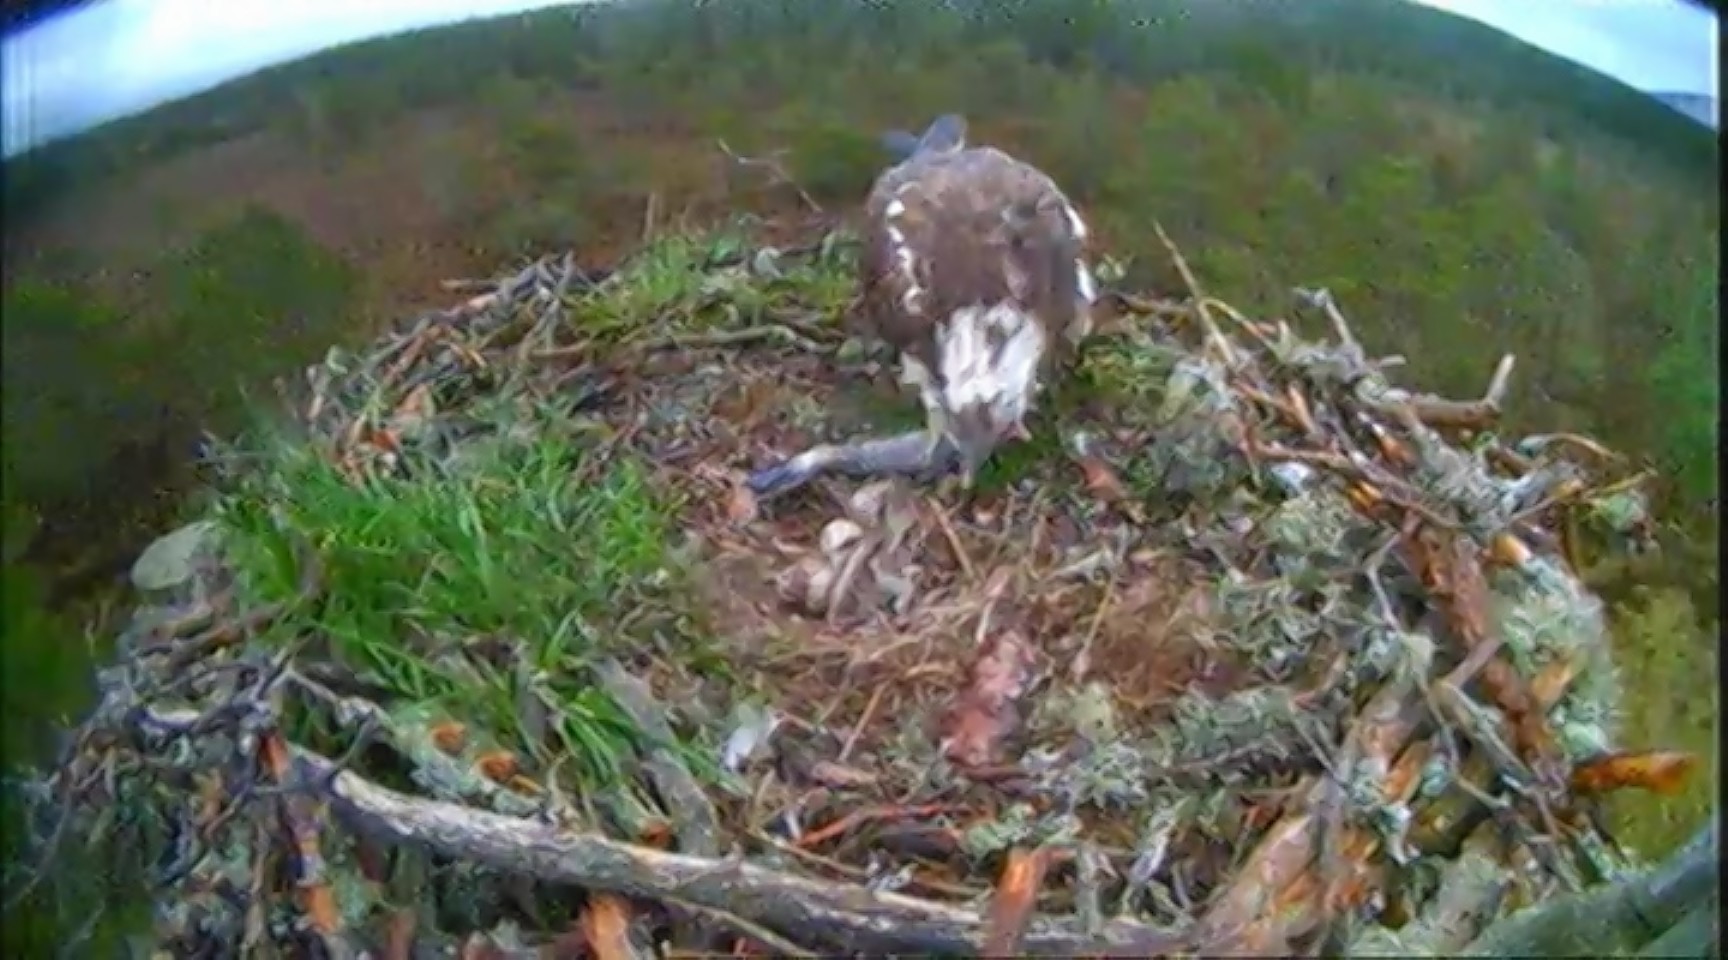 Female EJ and her new partner George produced three eggs last month at RSPB Scotland's Loch Garten reserve in the Cairngorms.